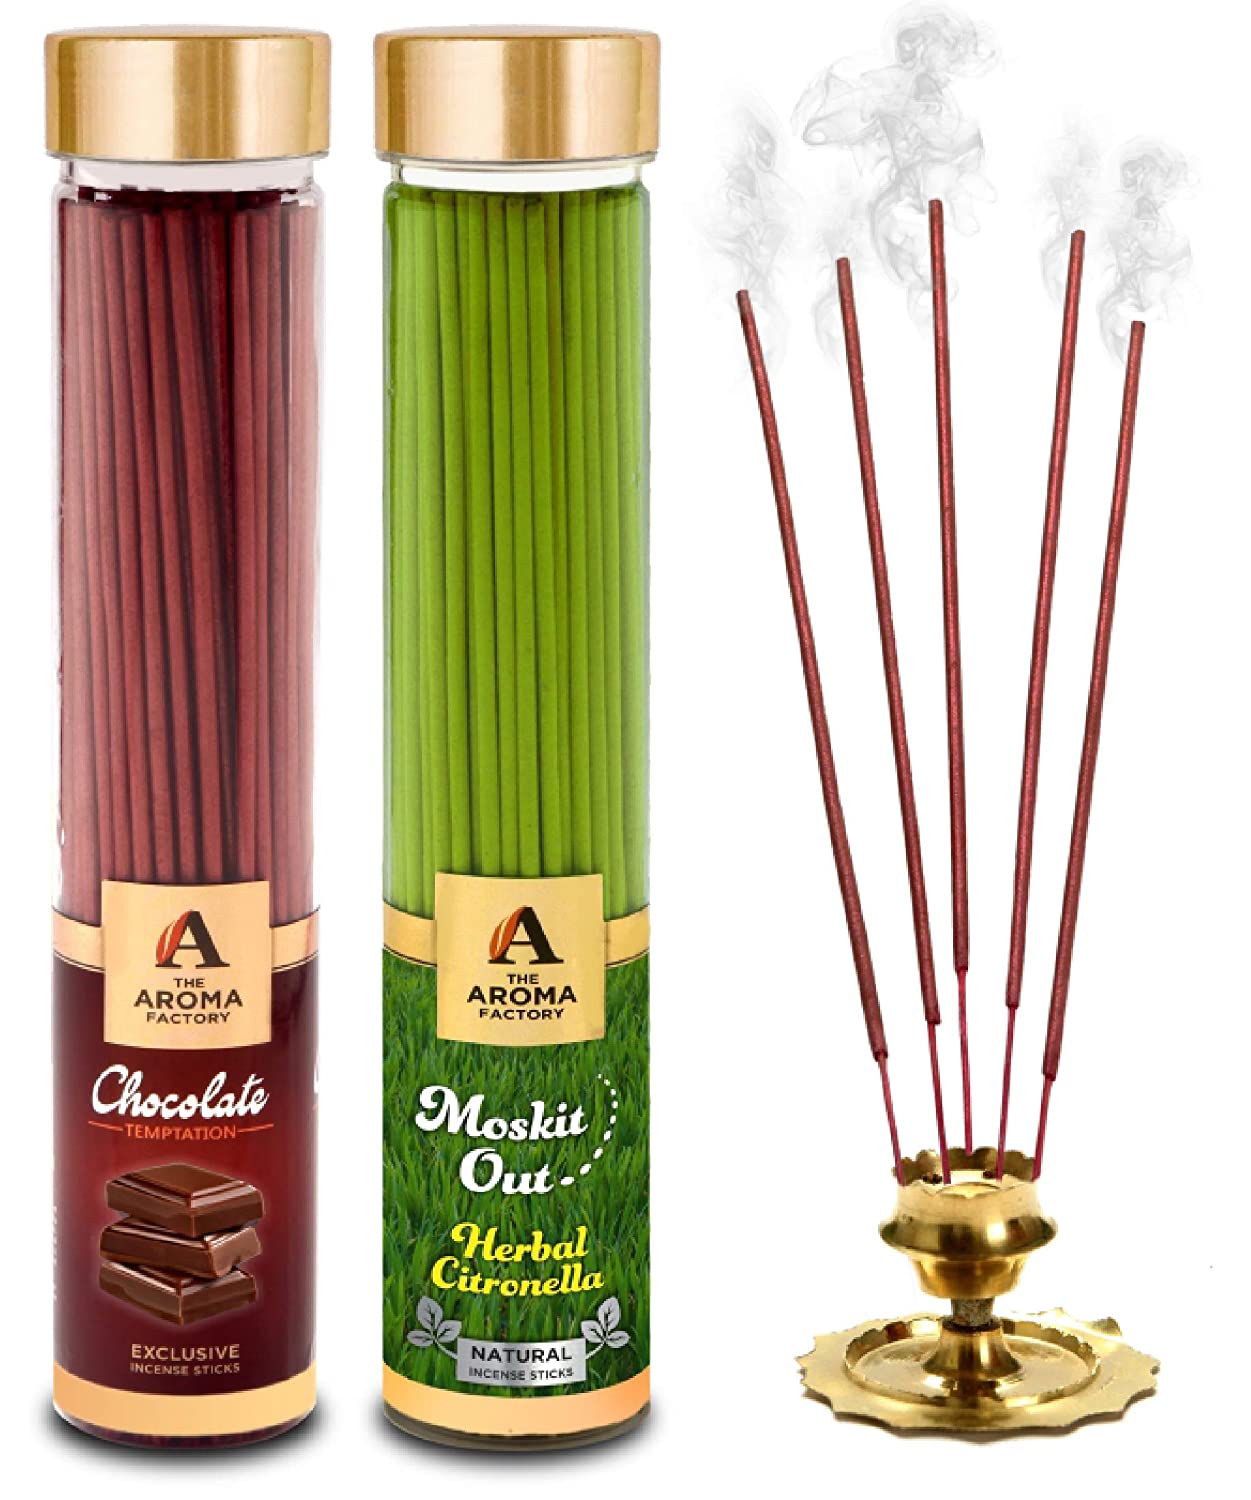 The Aroma Factory Chocolate & Mosquito Out Citronella Agarbatti (Charcoal Free & Low Smoke) Bottle Pack of 2 x 100